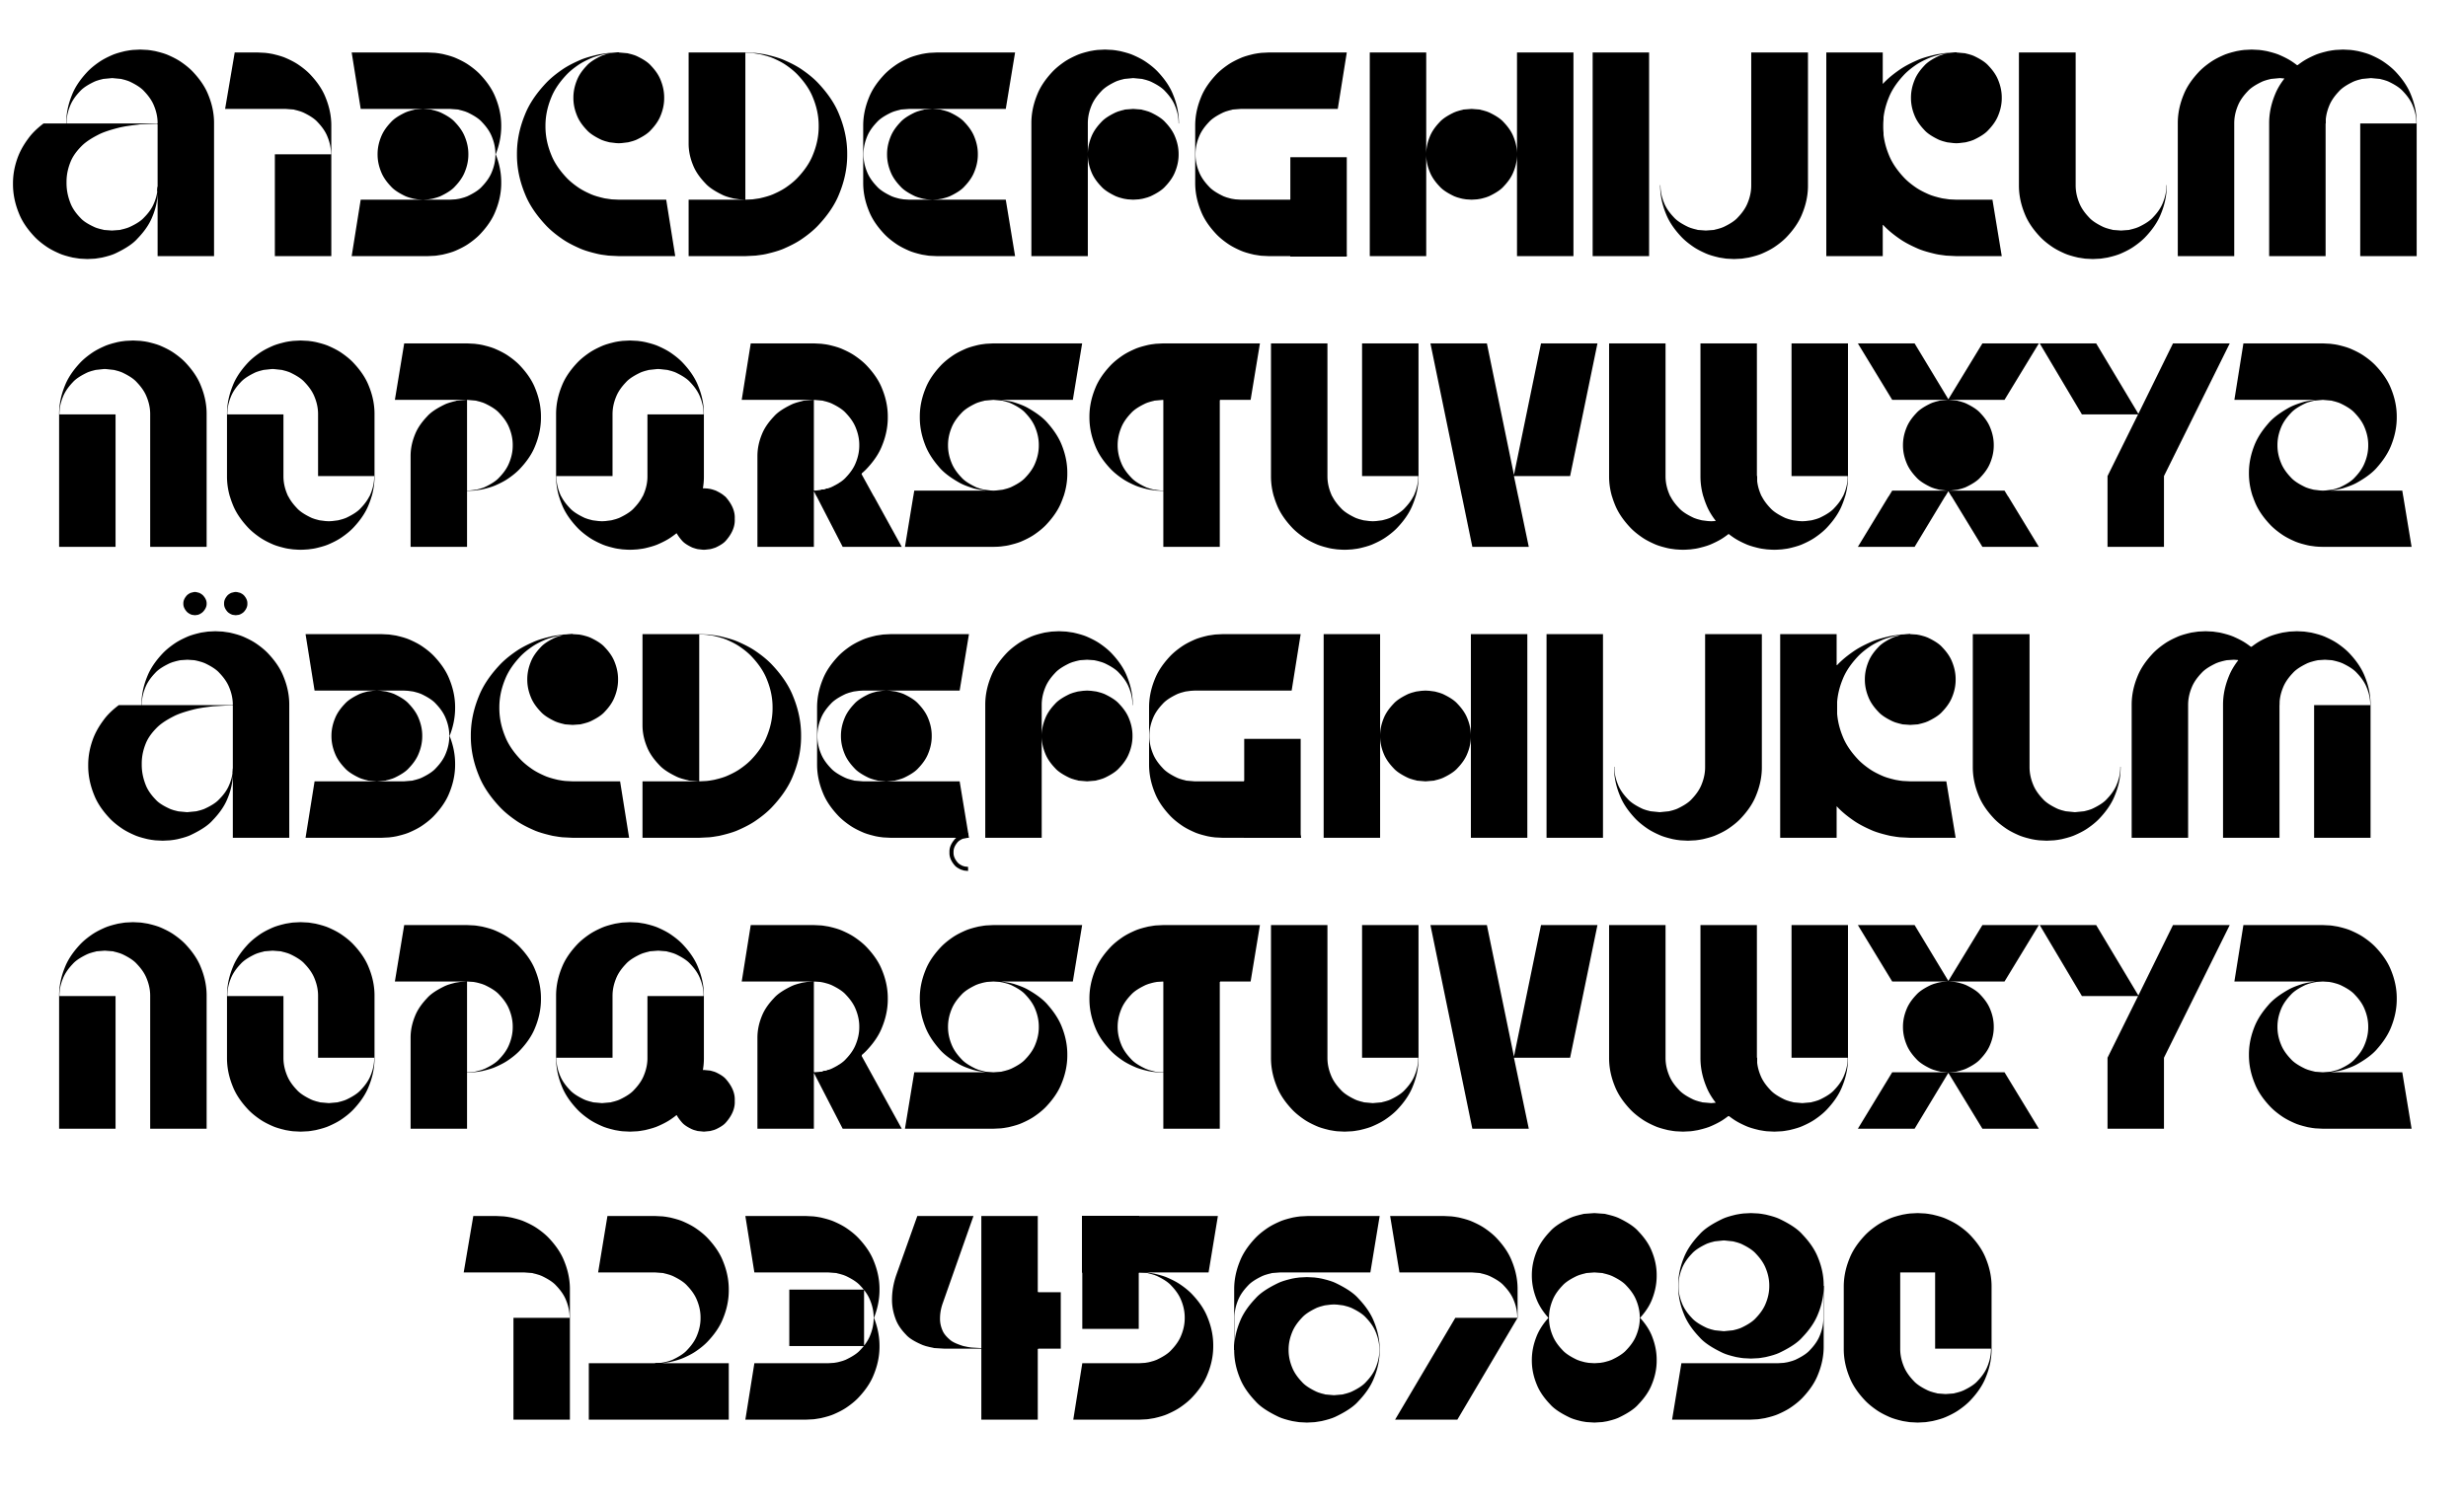 Font Mastering for Gregory Page's font: Eclect